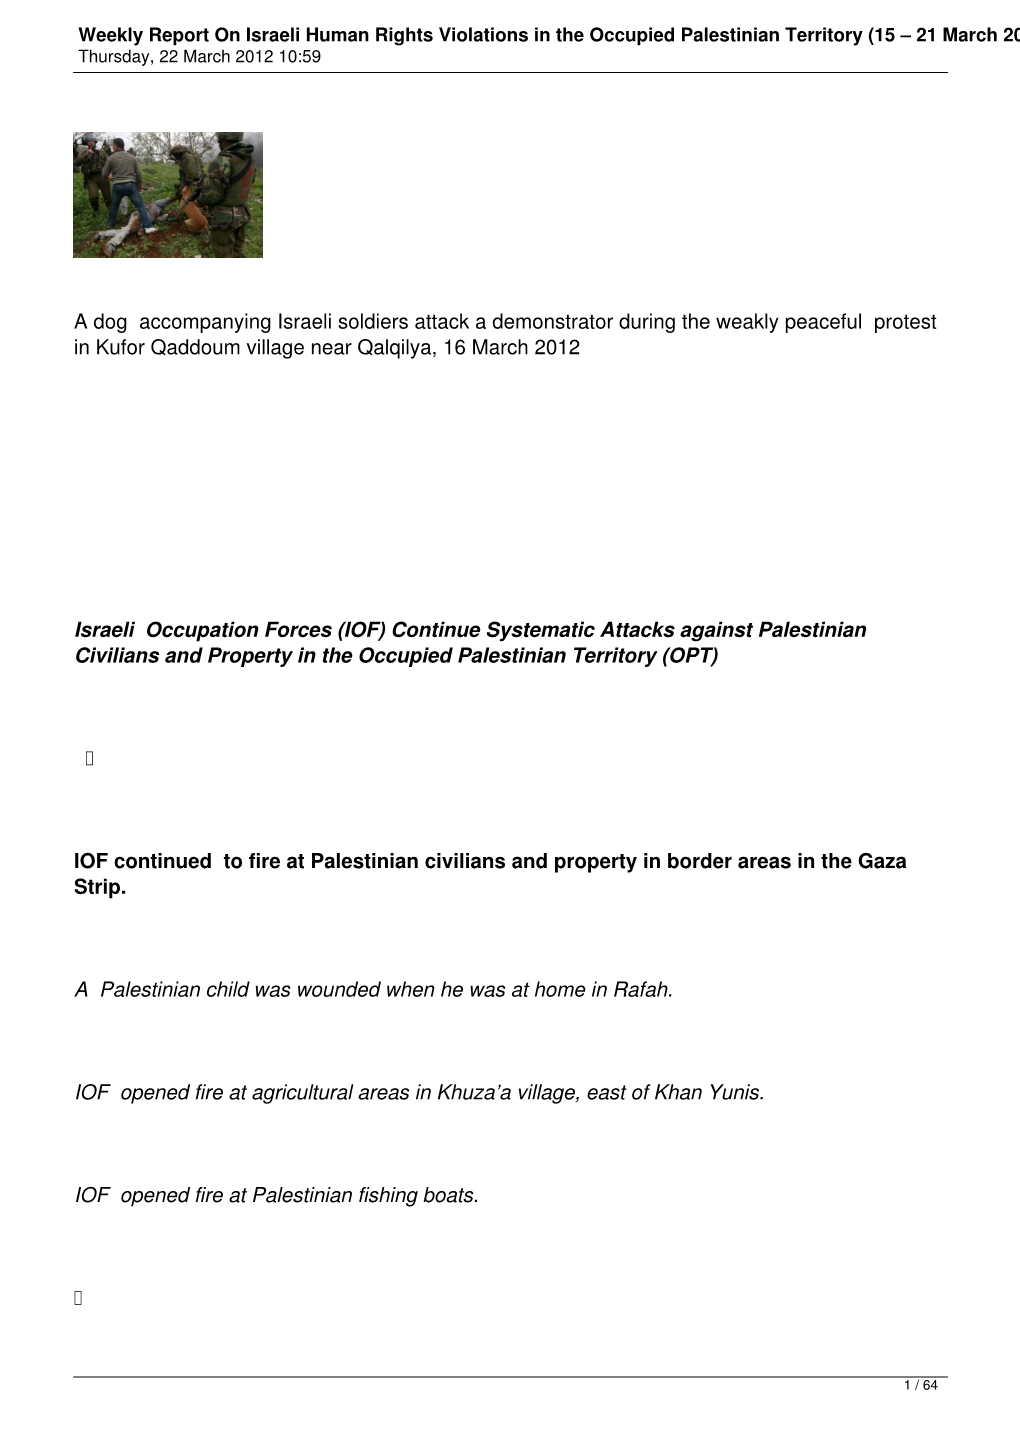 Weekly Report on Israeli Human Rights Violations in the Occupied Palestinian Territory (15 – 21 March 2012) Thursday, 22 March 2012 10:59